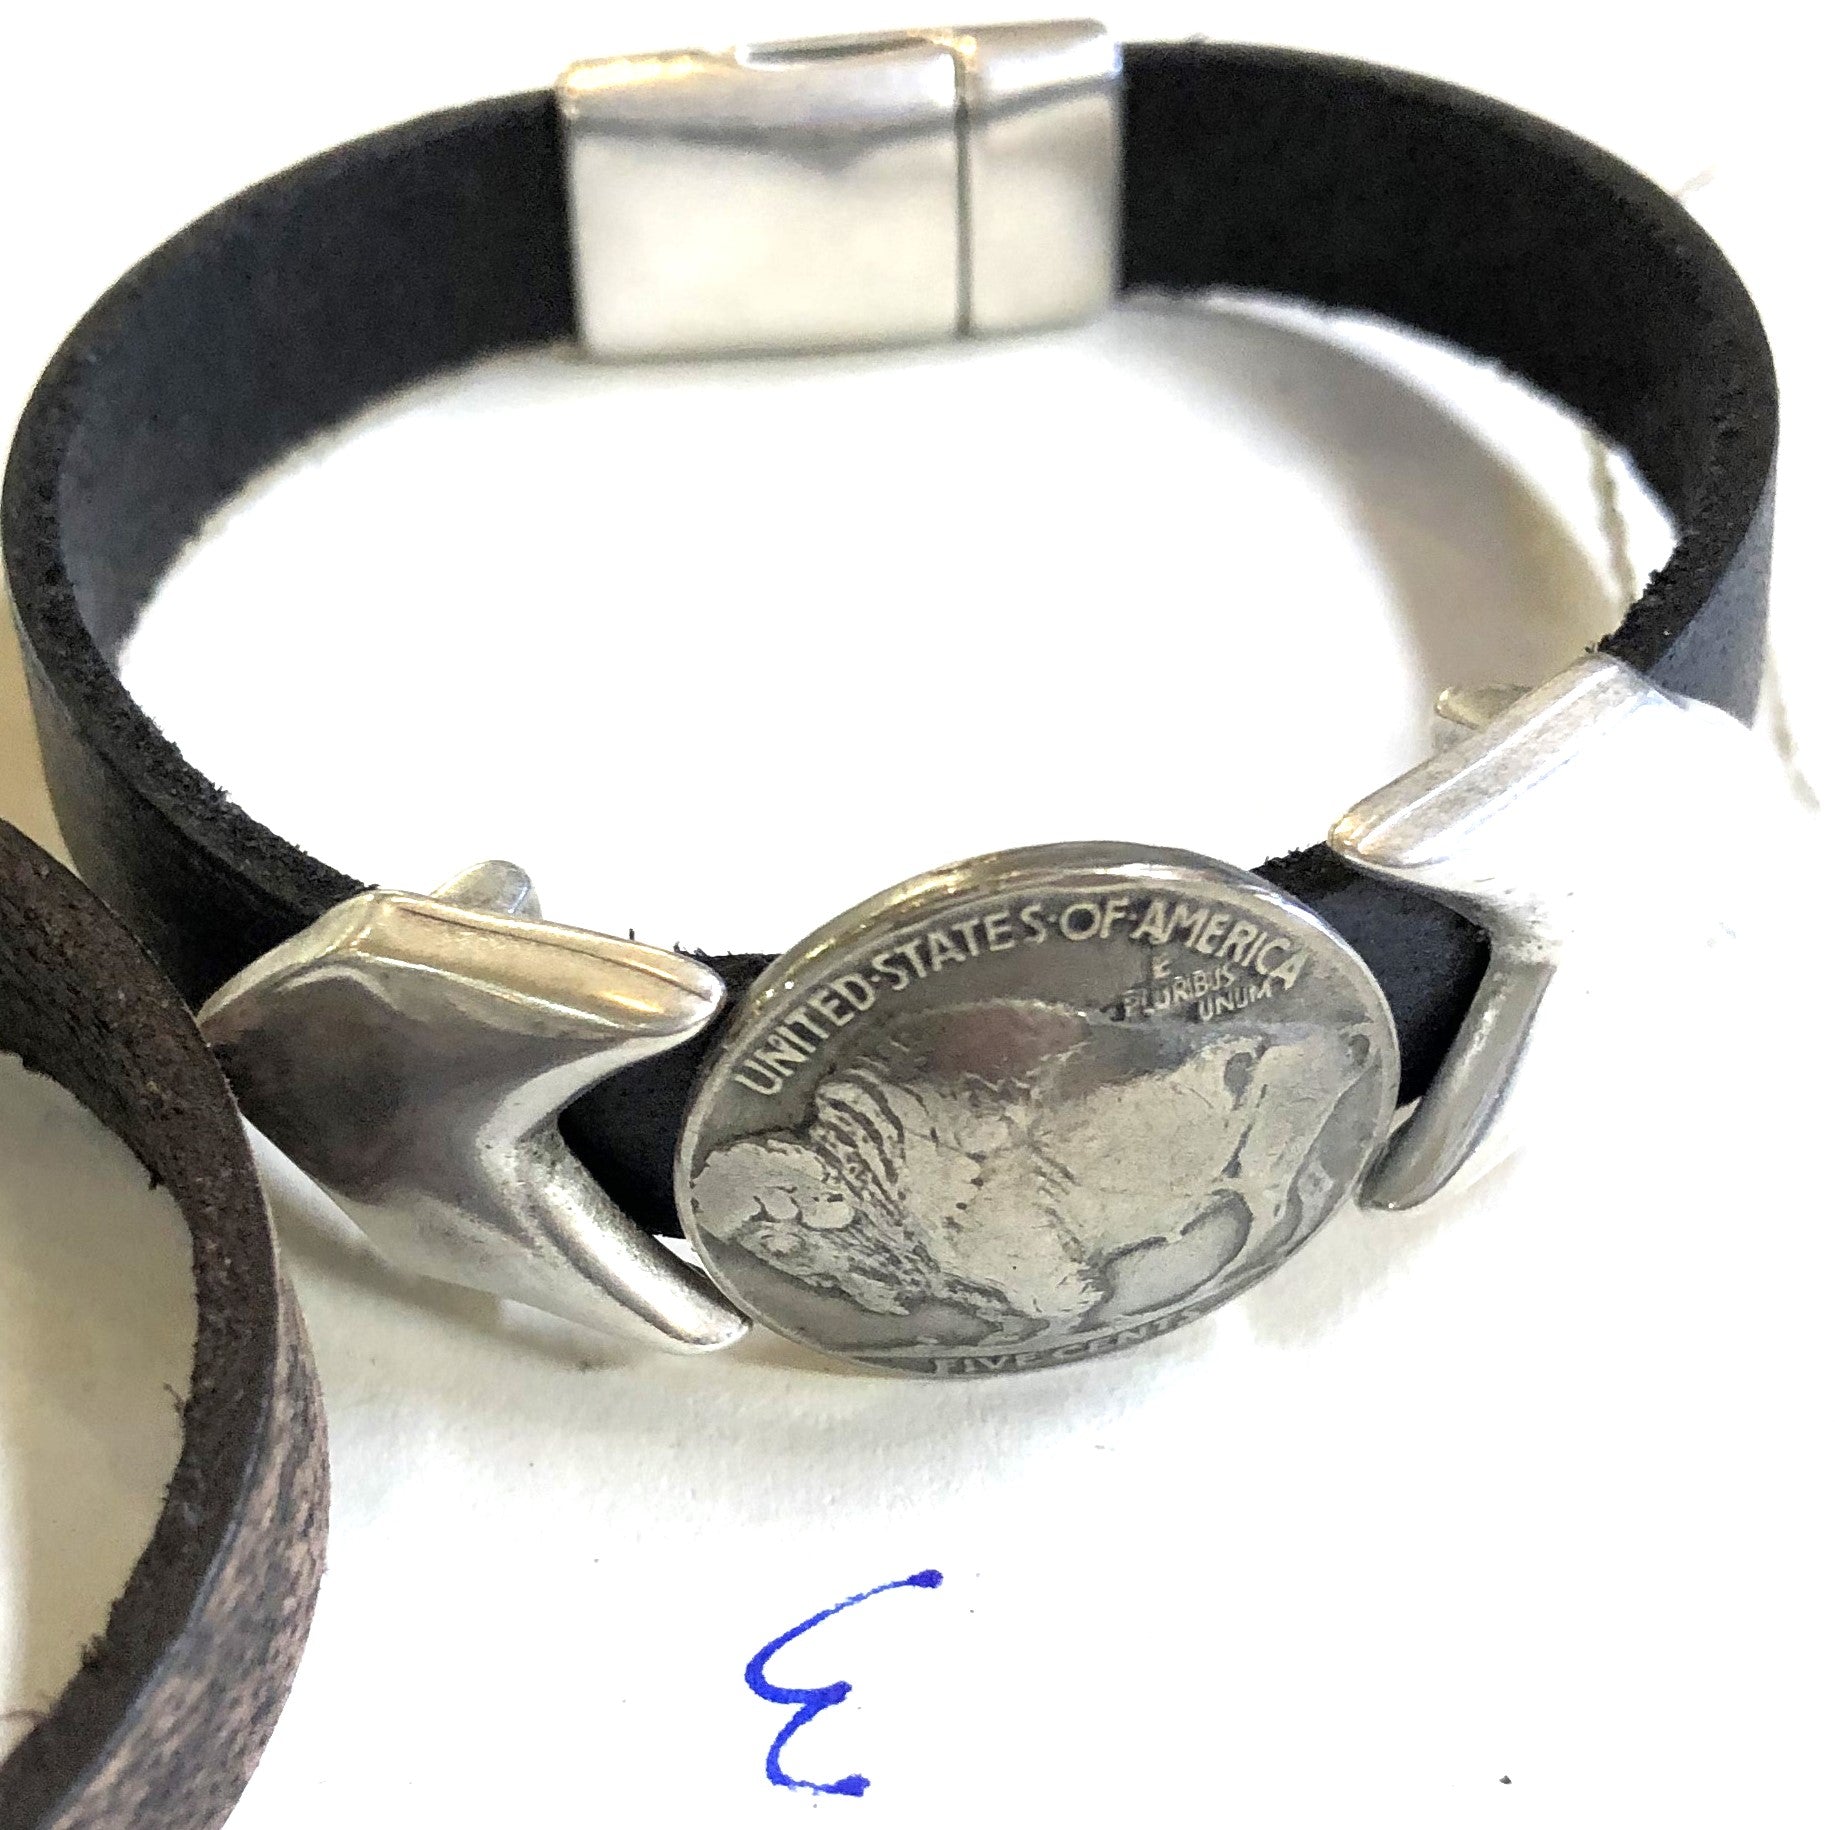 Cathy Crelling - Bracelets Crelling Bison Leather / Silver / Buffalo Nickel